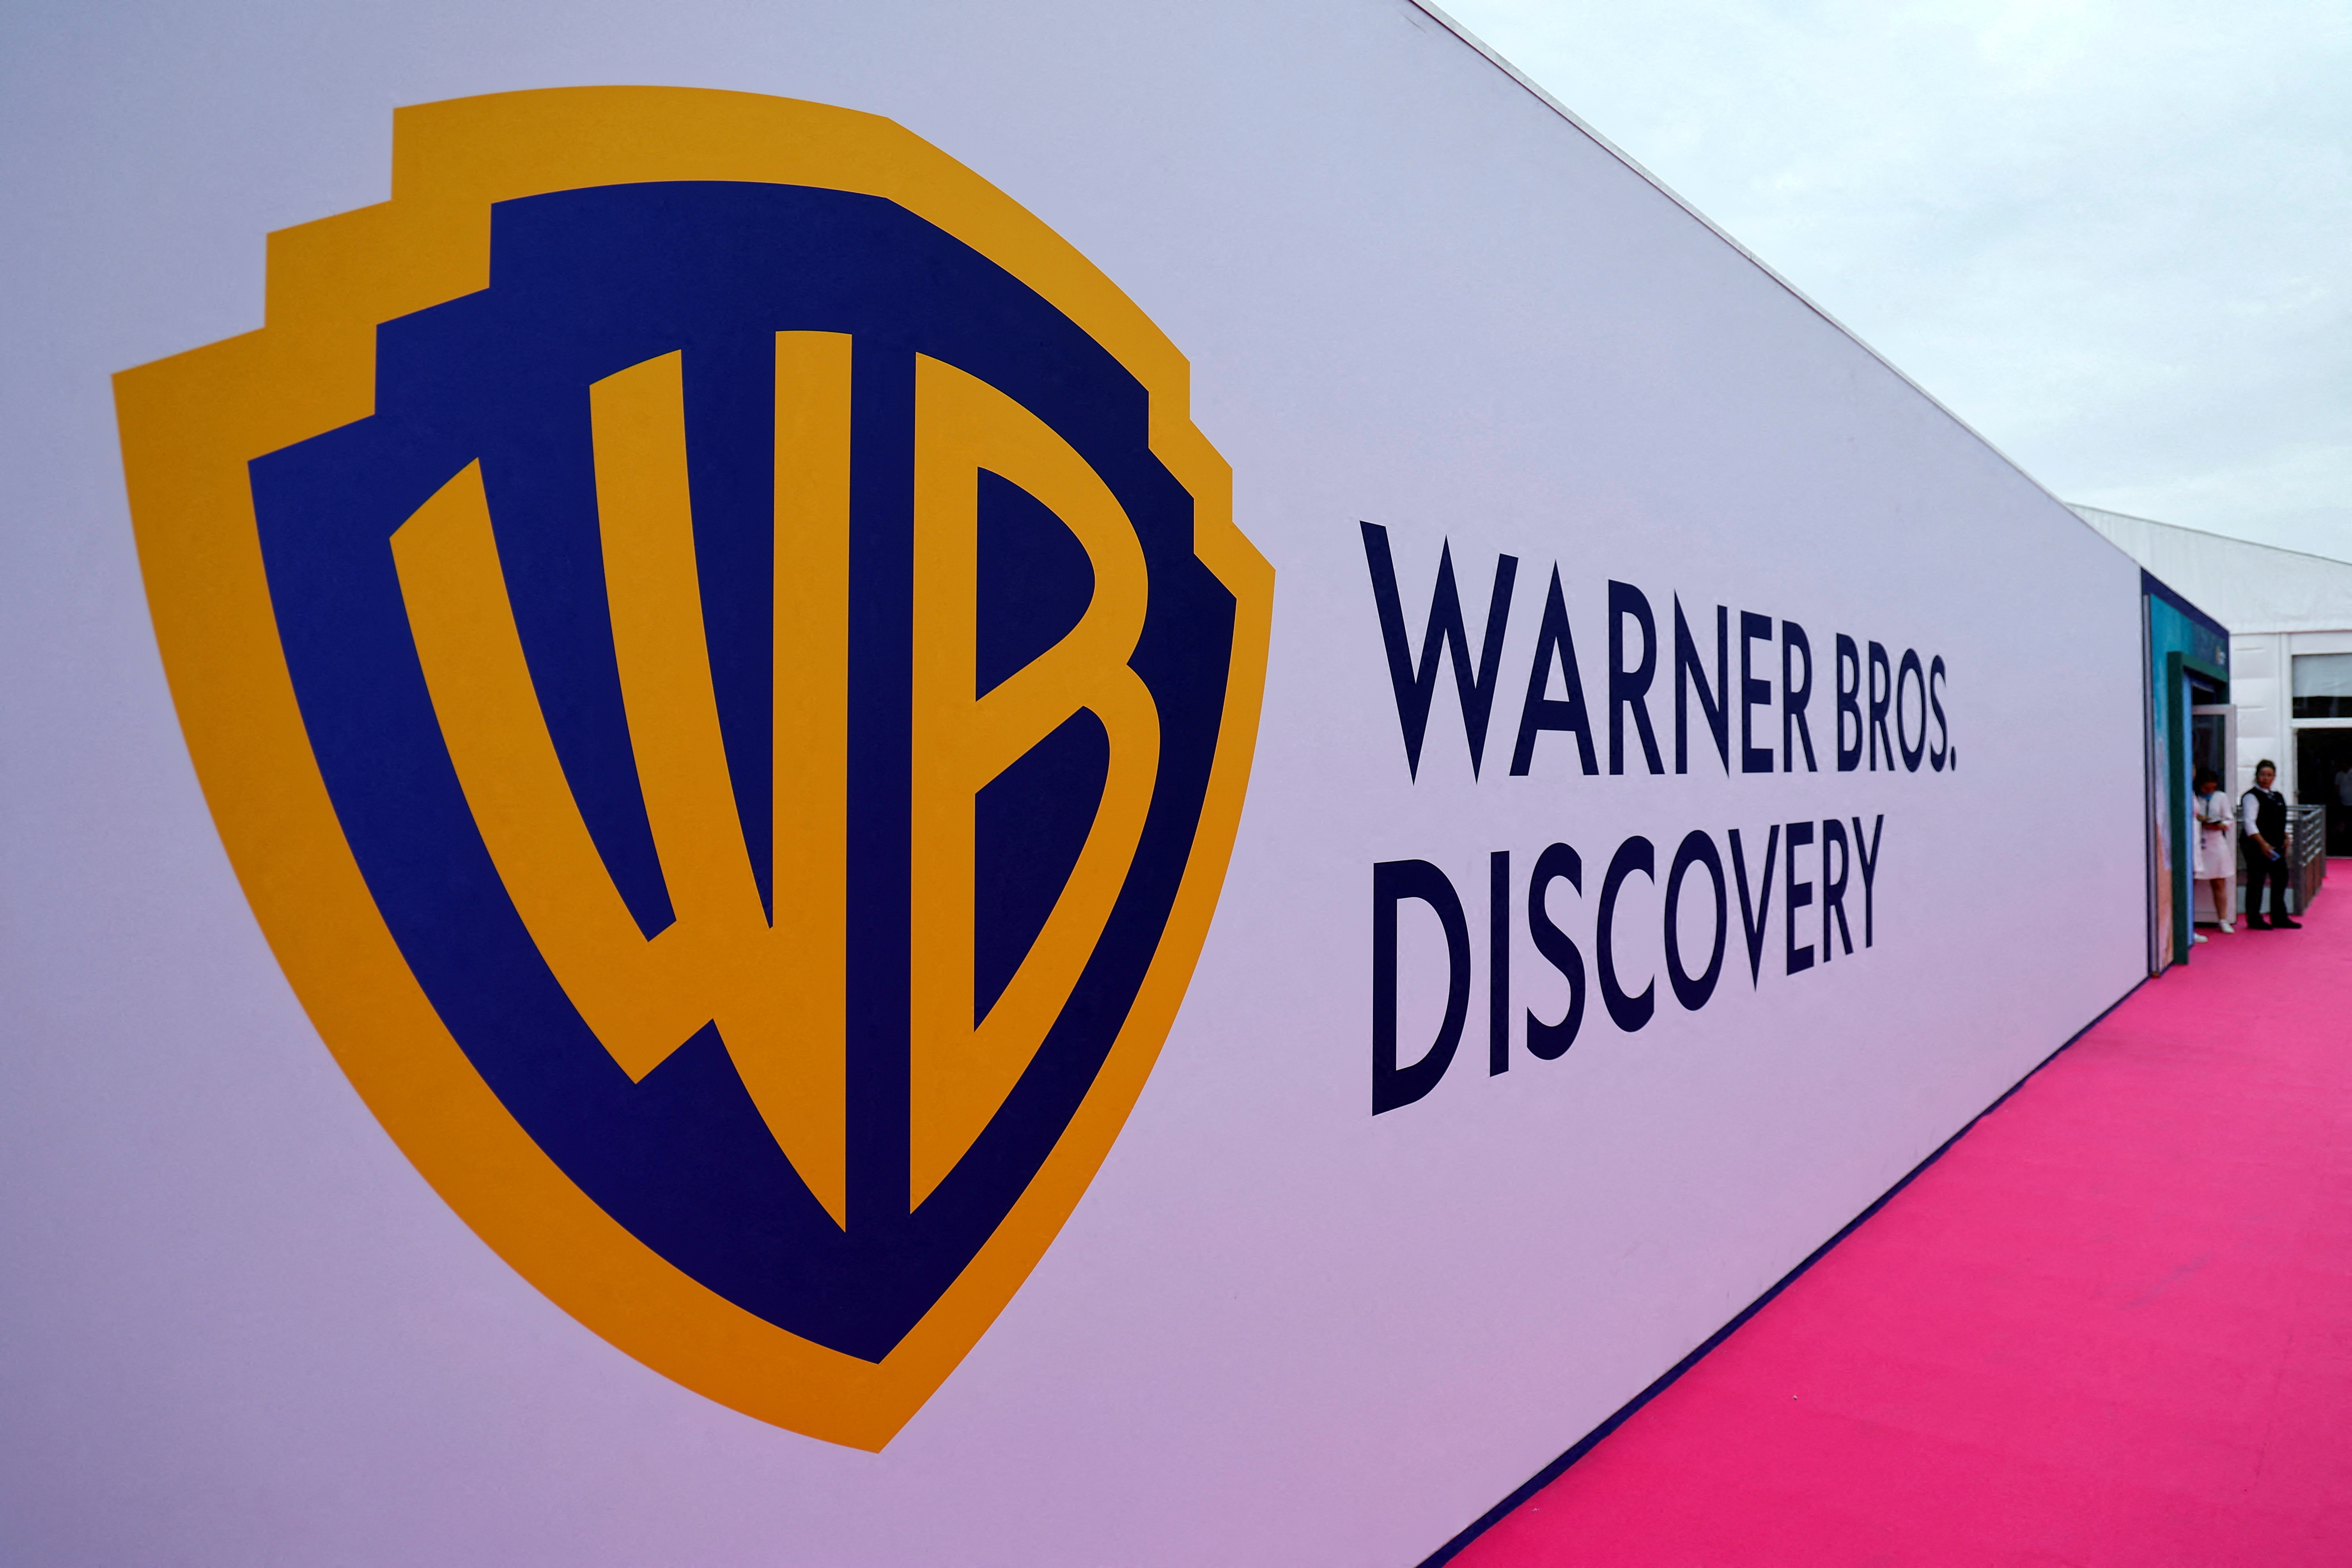 Just 11% of People Prefer the New Warner Bros. Logo, Showing the